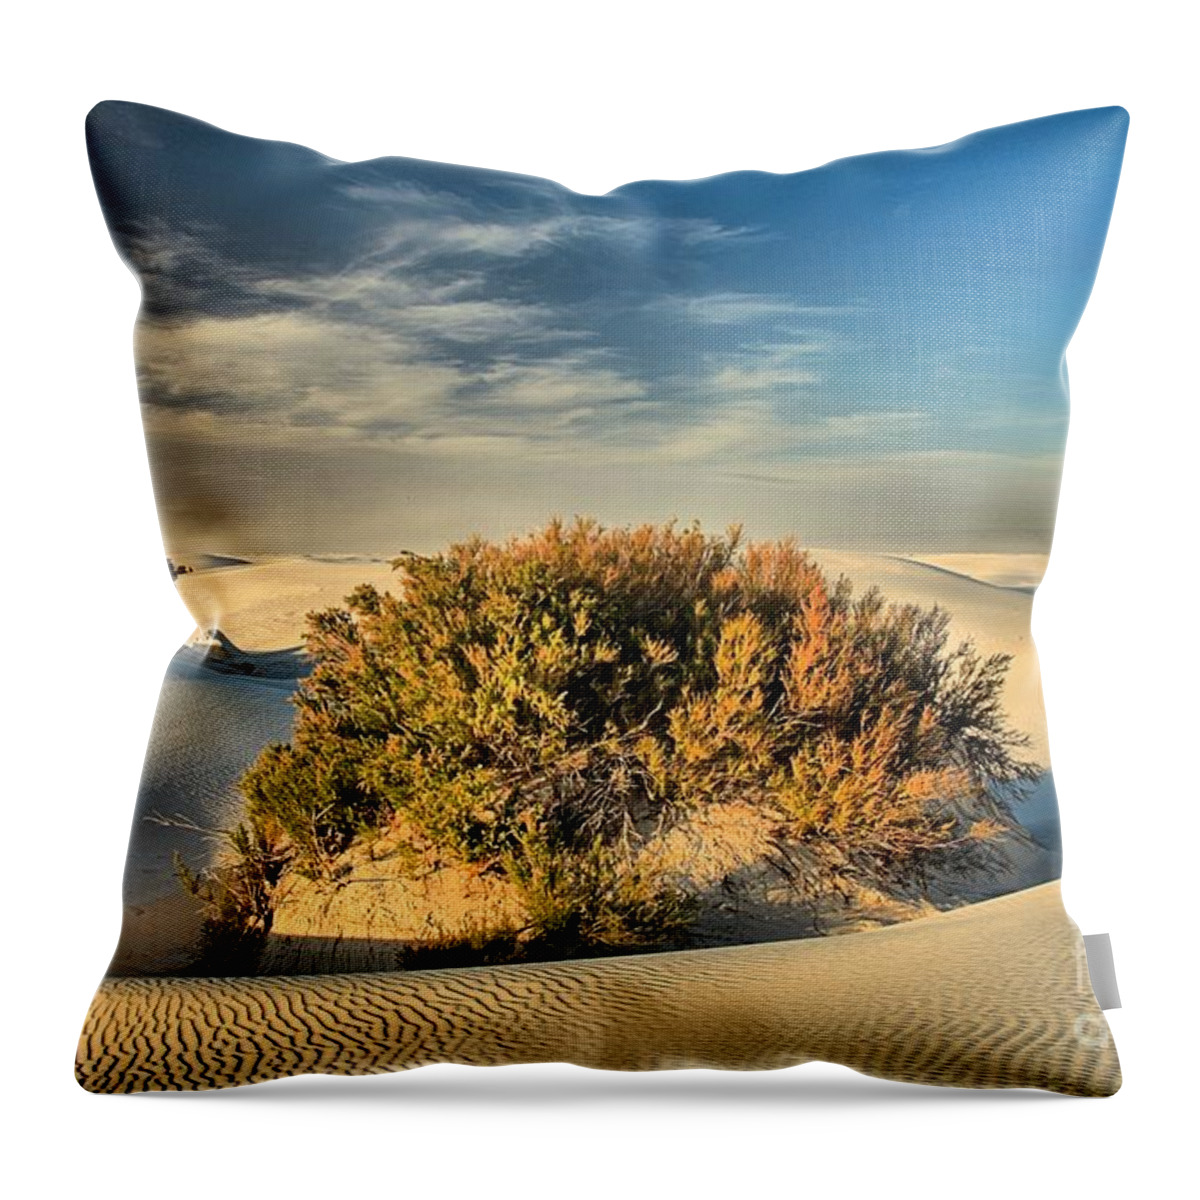 White Sands National Monument Throw Pillow featuring the photograph Trees In Isolation by Adam Jewell